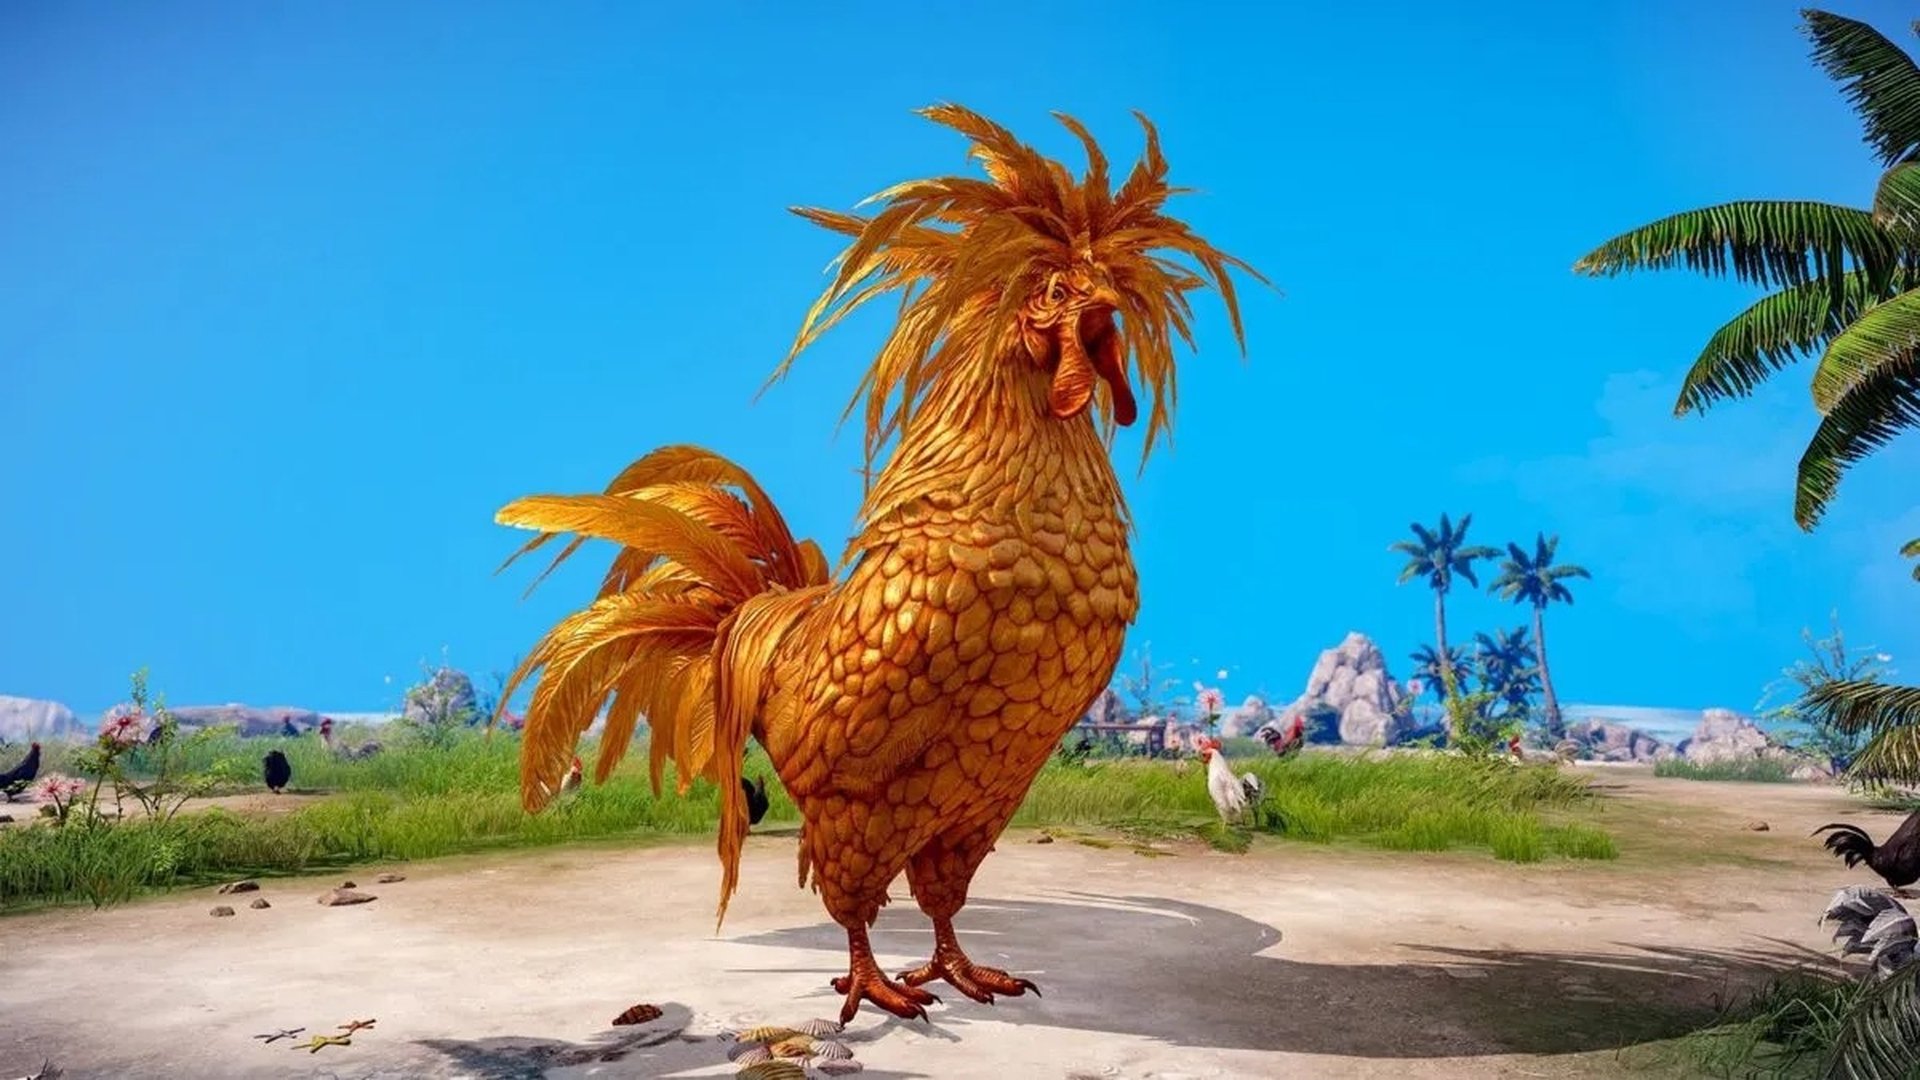 In this guide, we will cover all there is to know about the Lost Ark Chicken Festival, including the location of the Wild Wing Island Lost Ark and rewards.